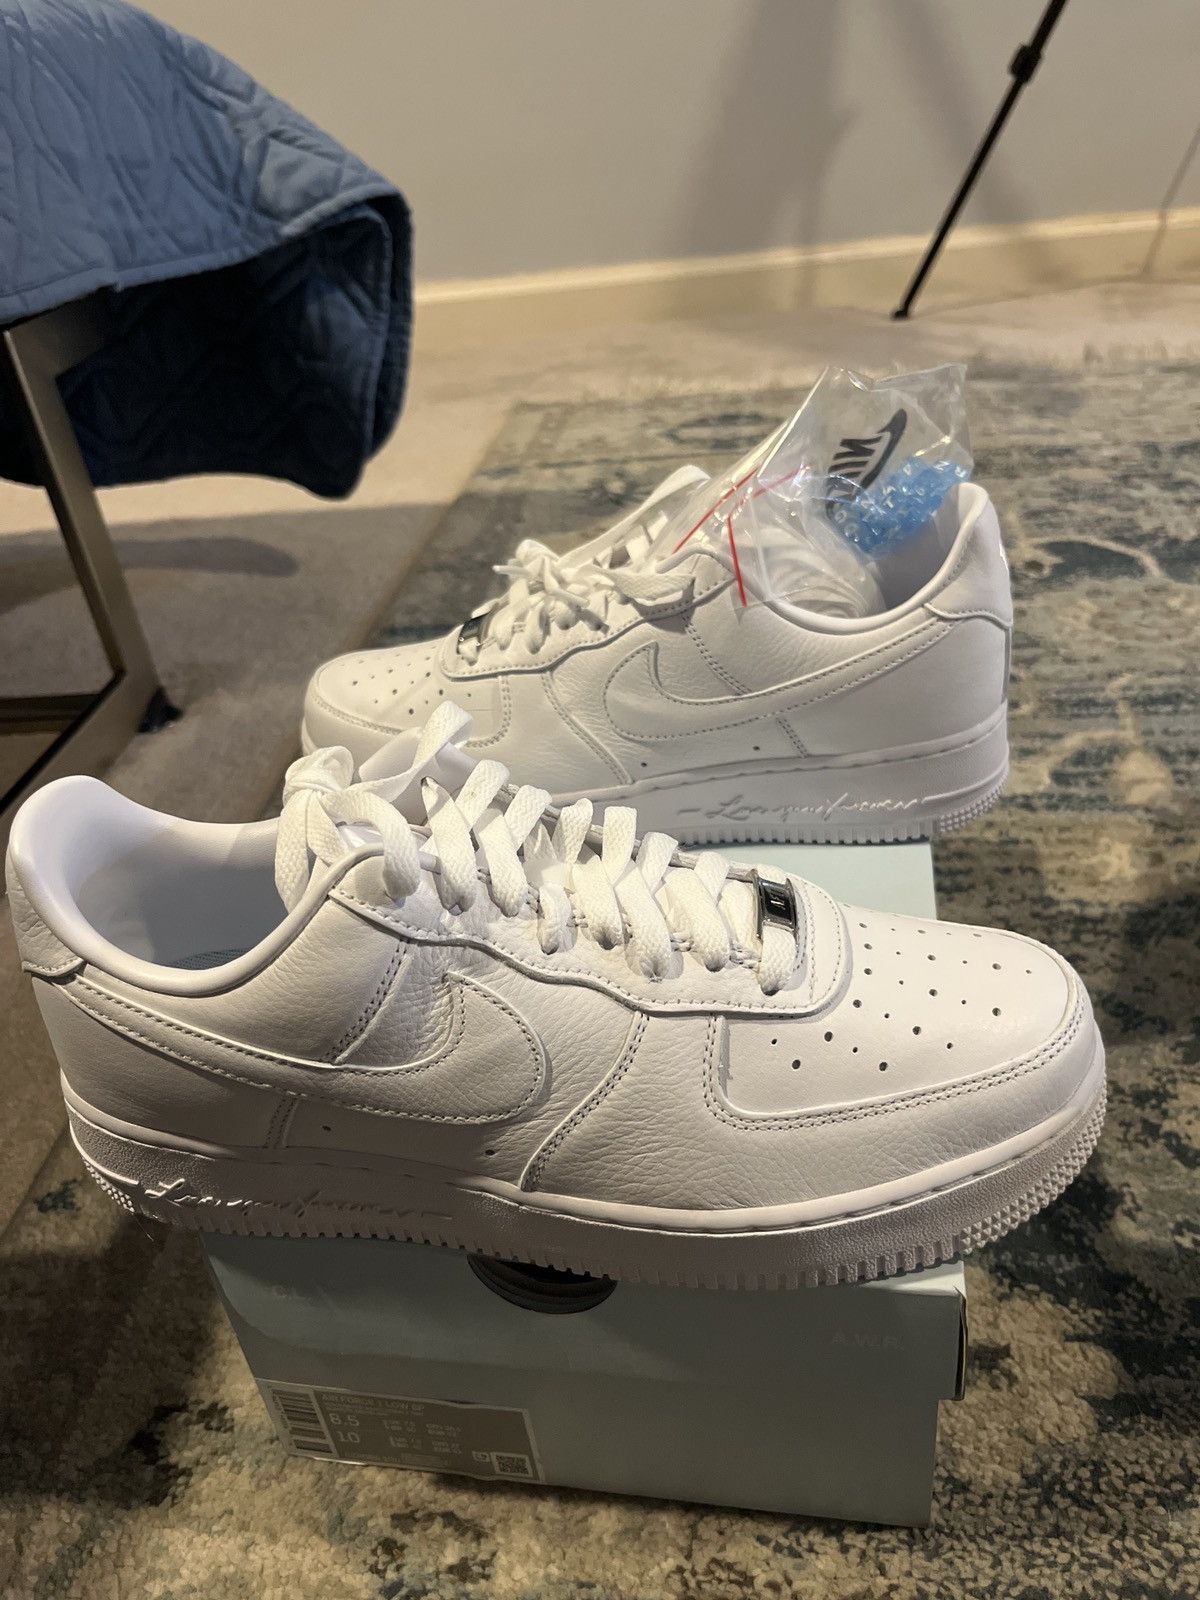 Nike Nocta x Nike Air Force 1 Low SP “Love You Forever” | Grailed